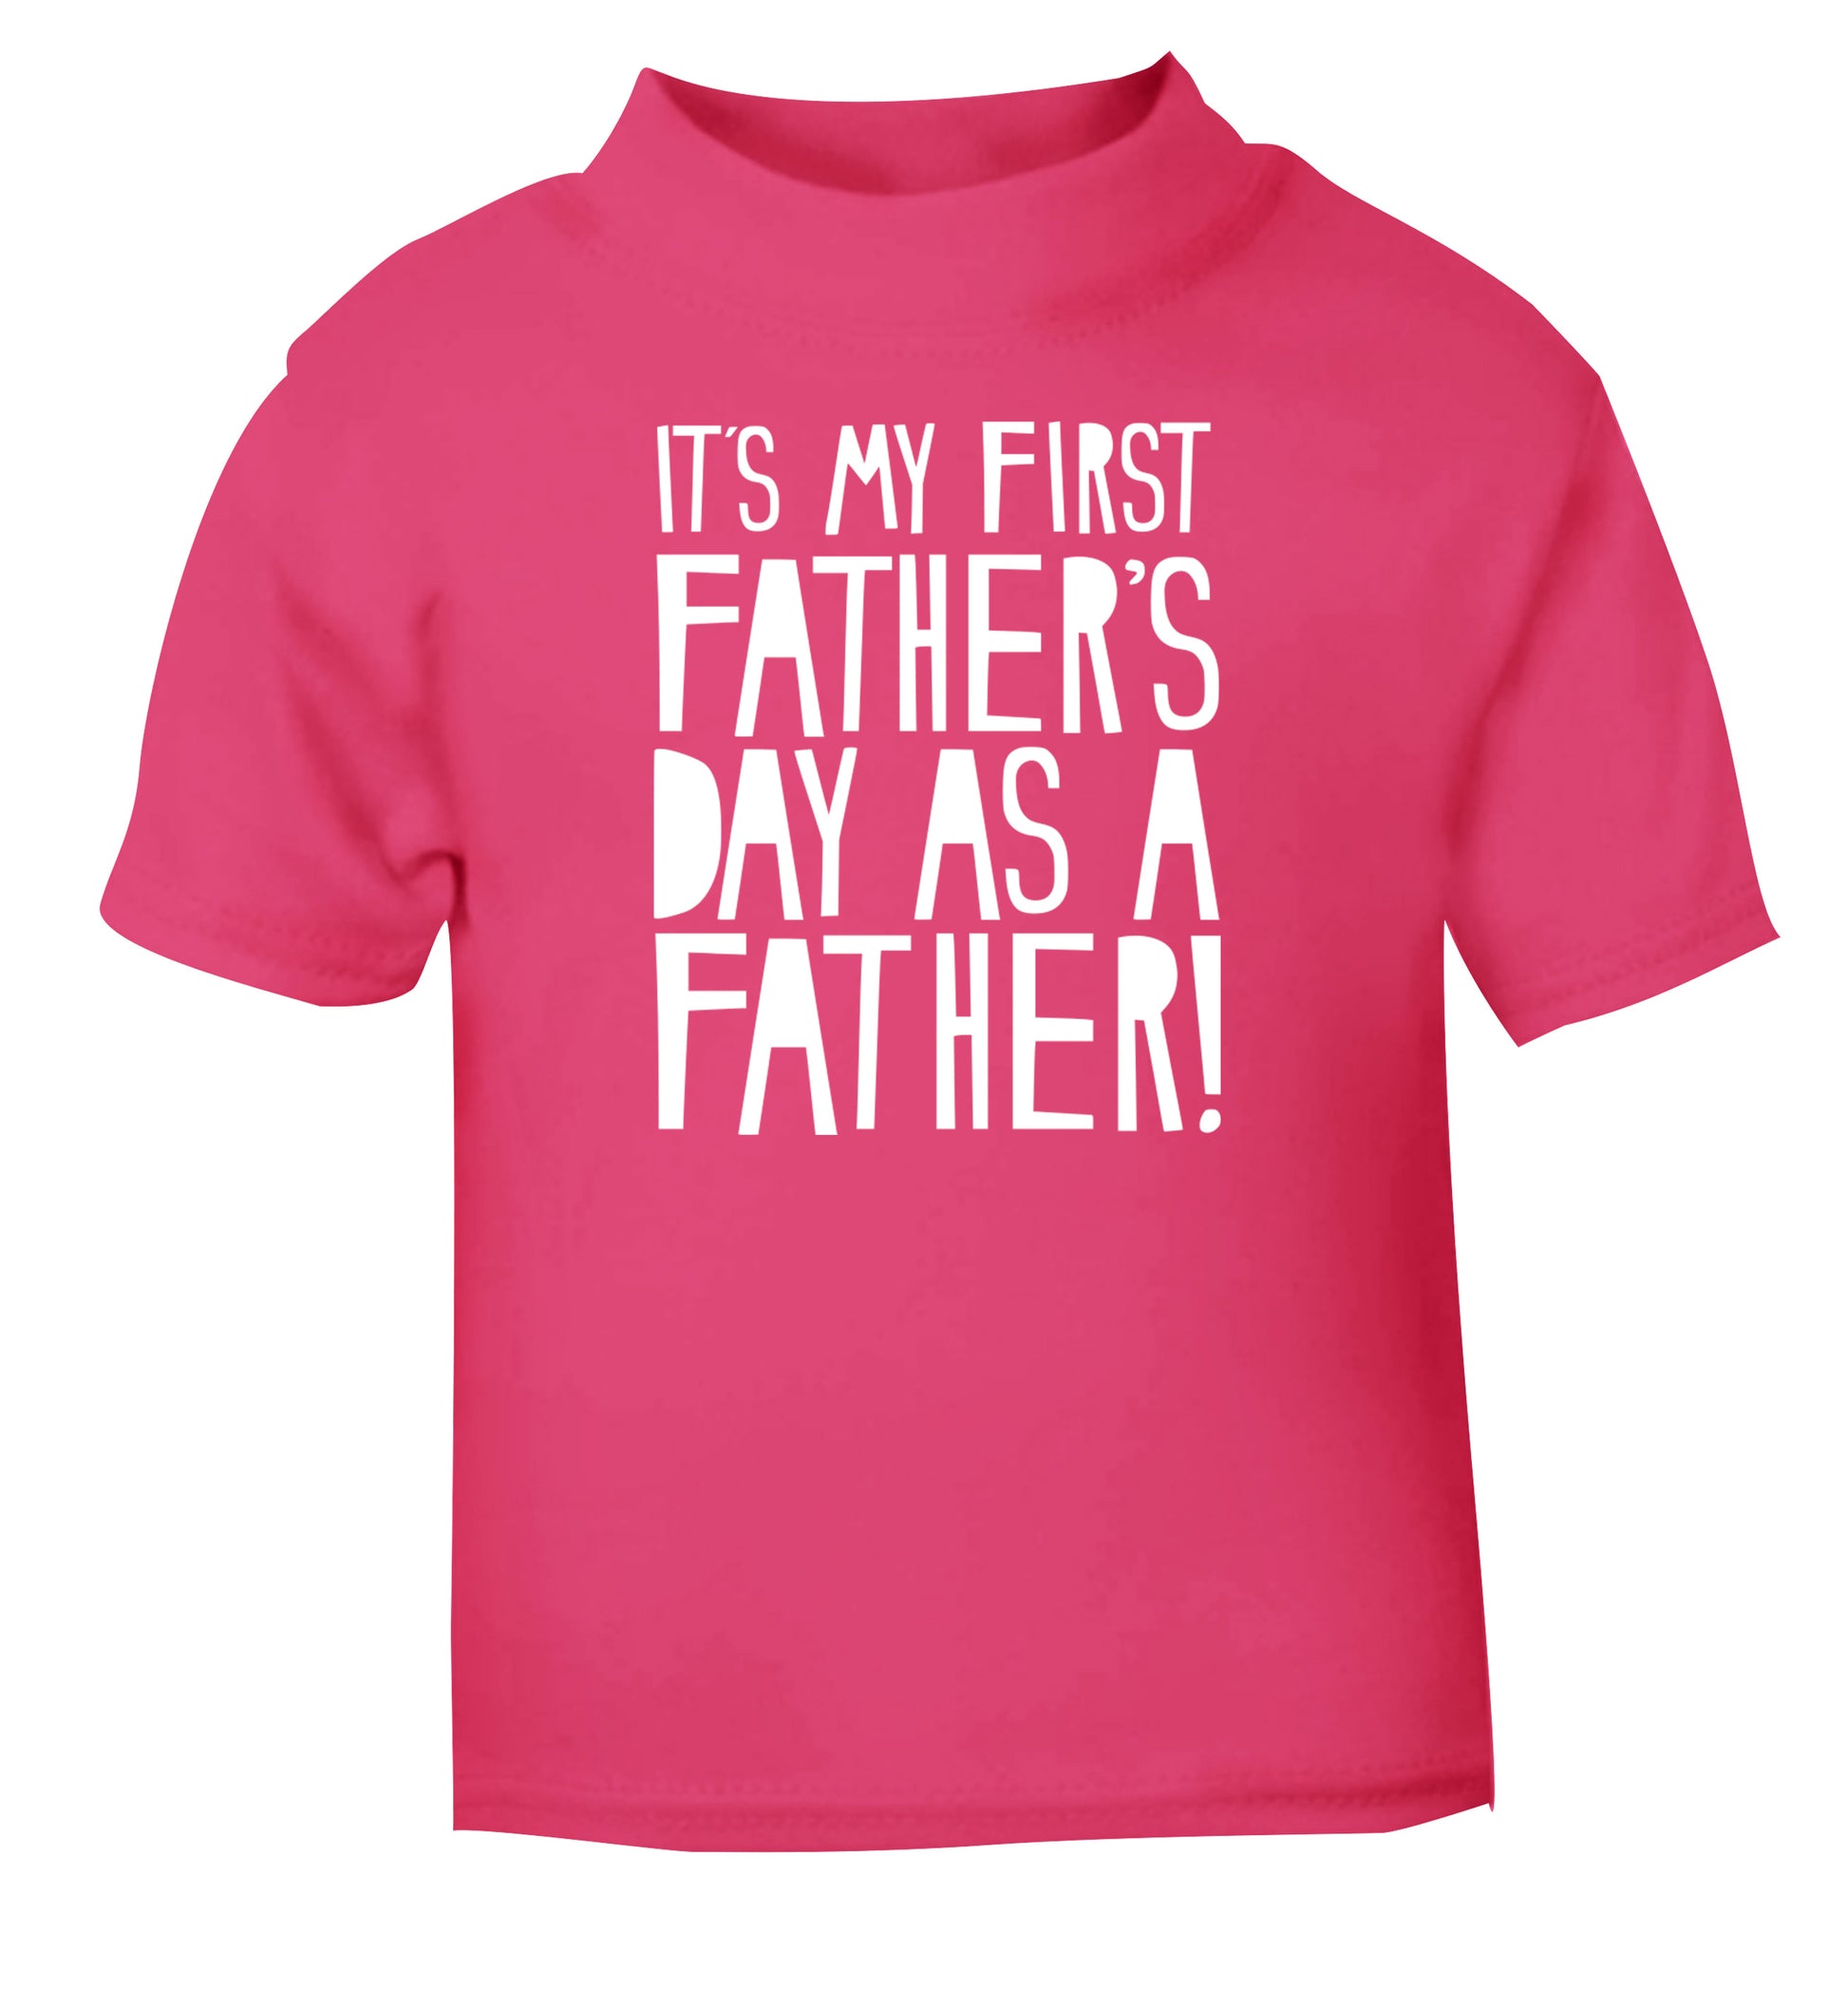 It's my first Father's Day as a father! pink Baby Toddler Tshirt 2 Years